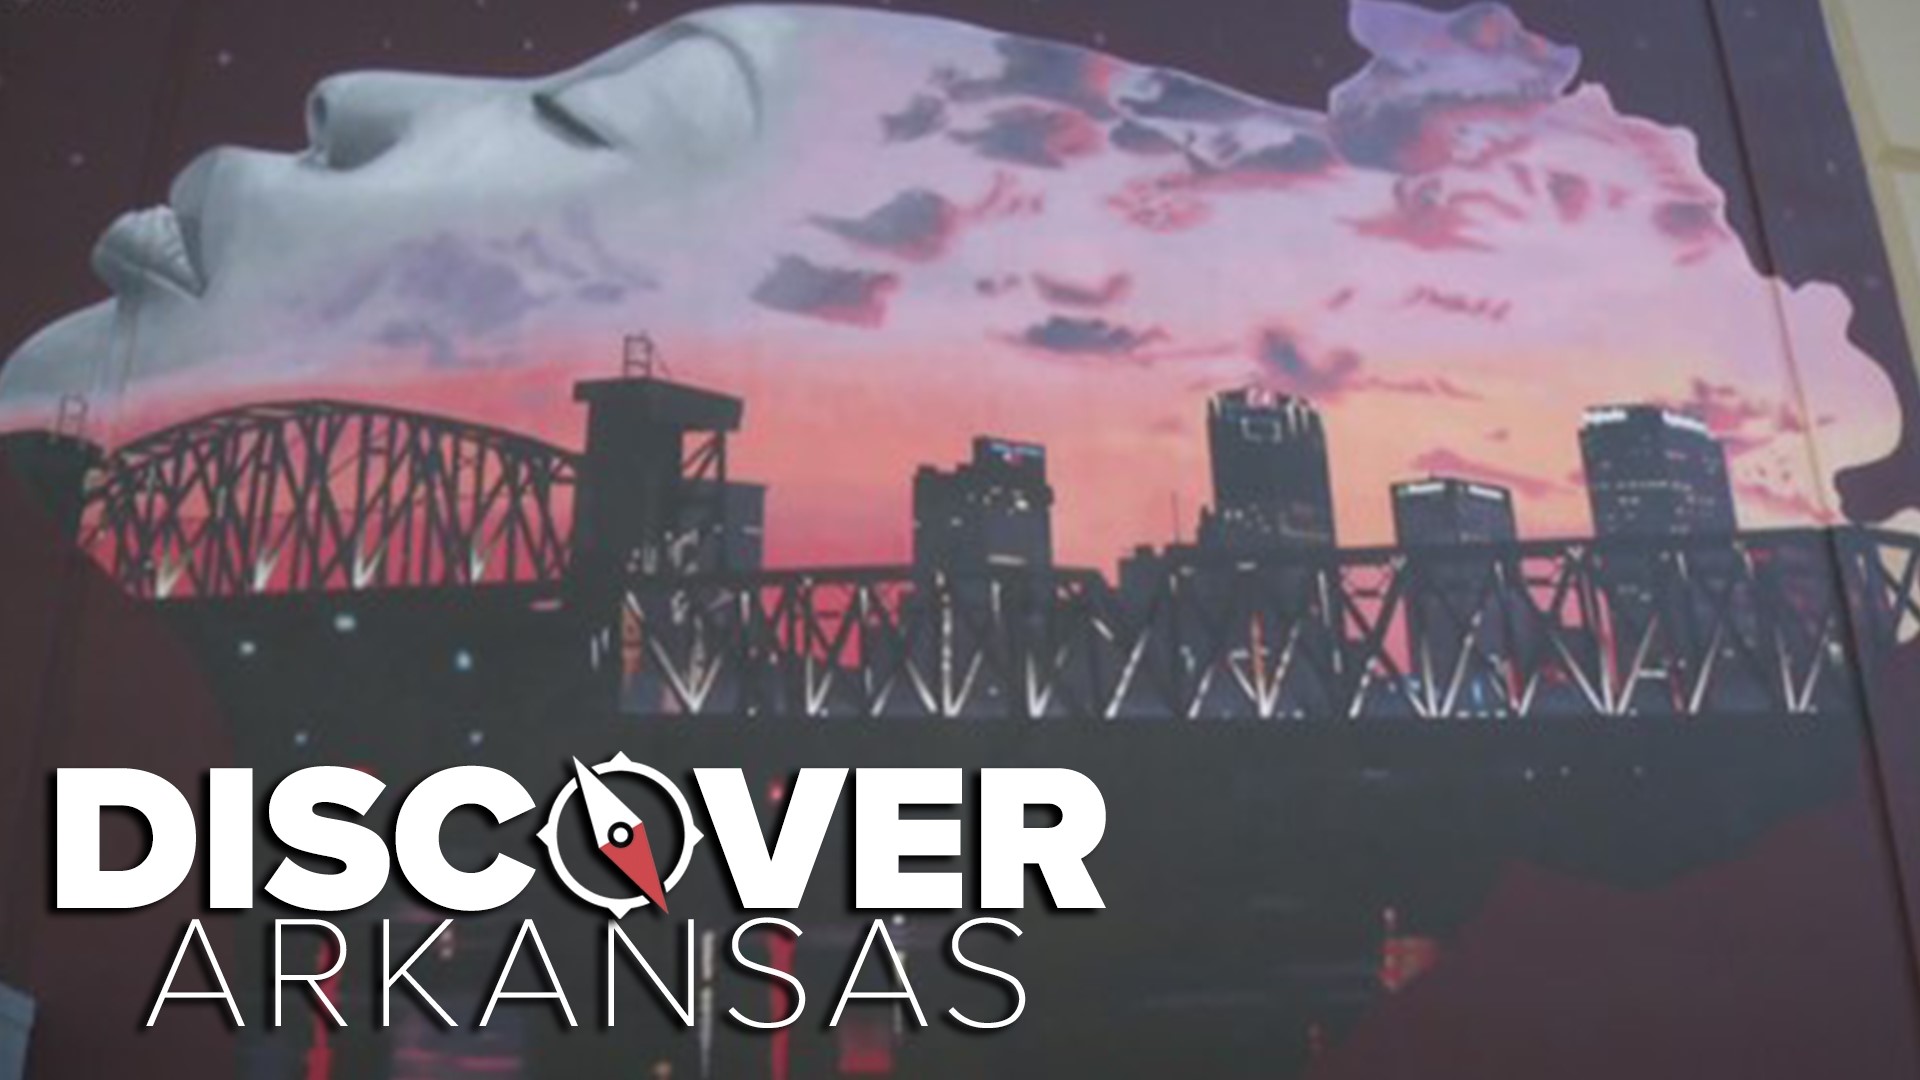 Downtown Little Rock has recently come alive with beautiful murals. In this week's Discover Arkansas's, Ashley takes an art adventure.